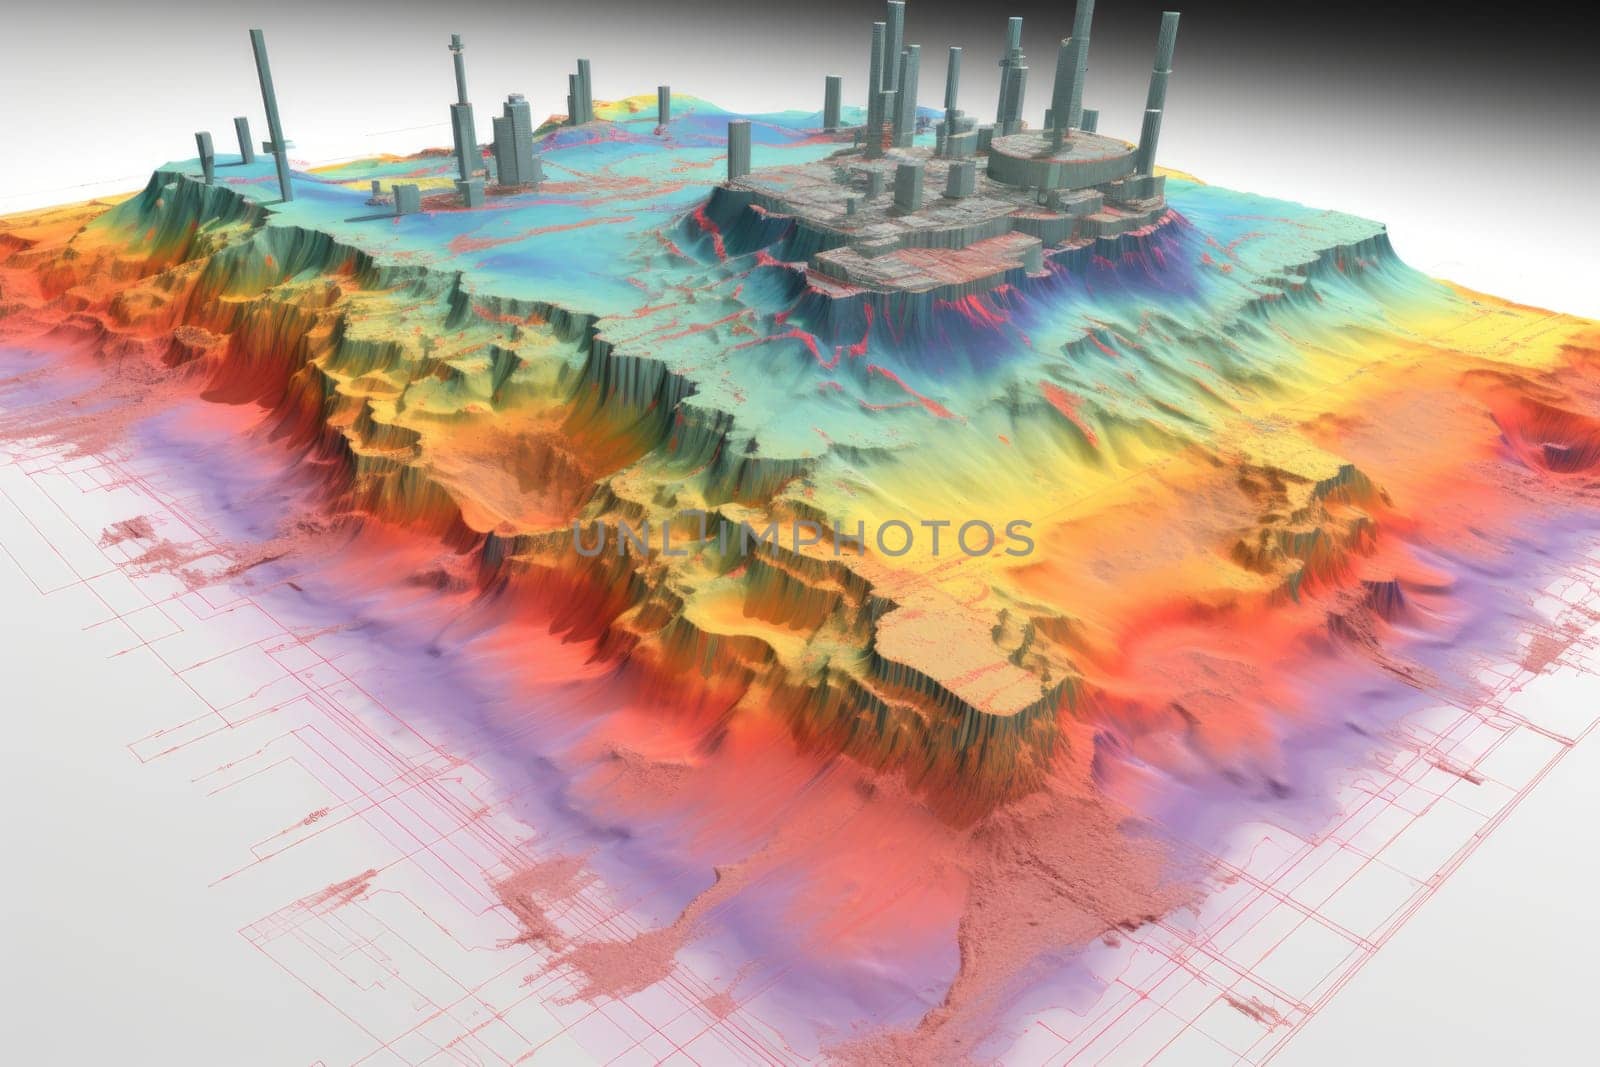 Search for places for oil production. A cross section of the earth. Oil production. Layers of soil. 3d illustration by Lobachad